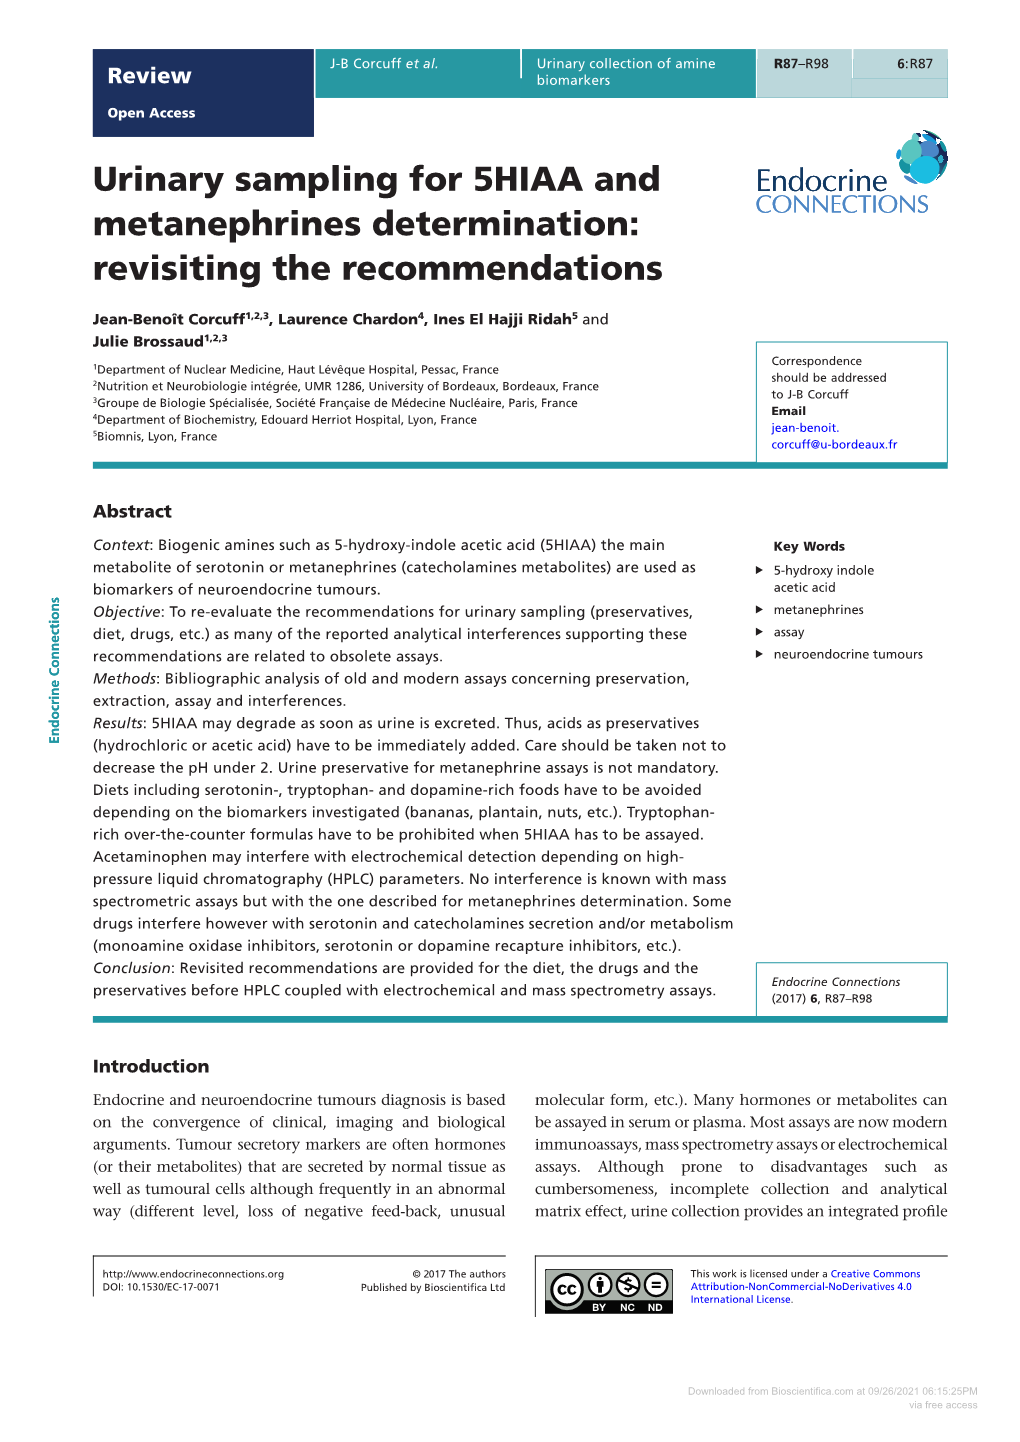 Urinary Sampling for 5HIAA and Metanephrines Determination: Revisiting the Recommendations